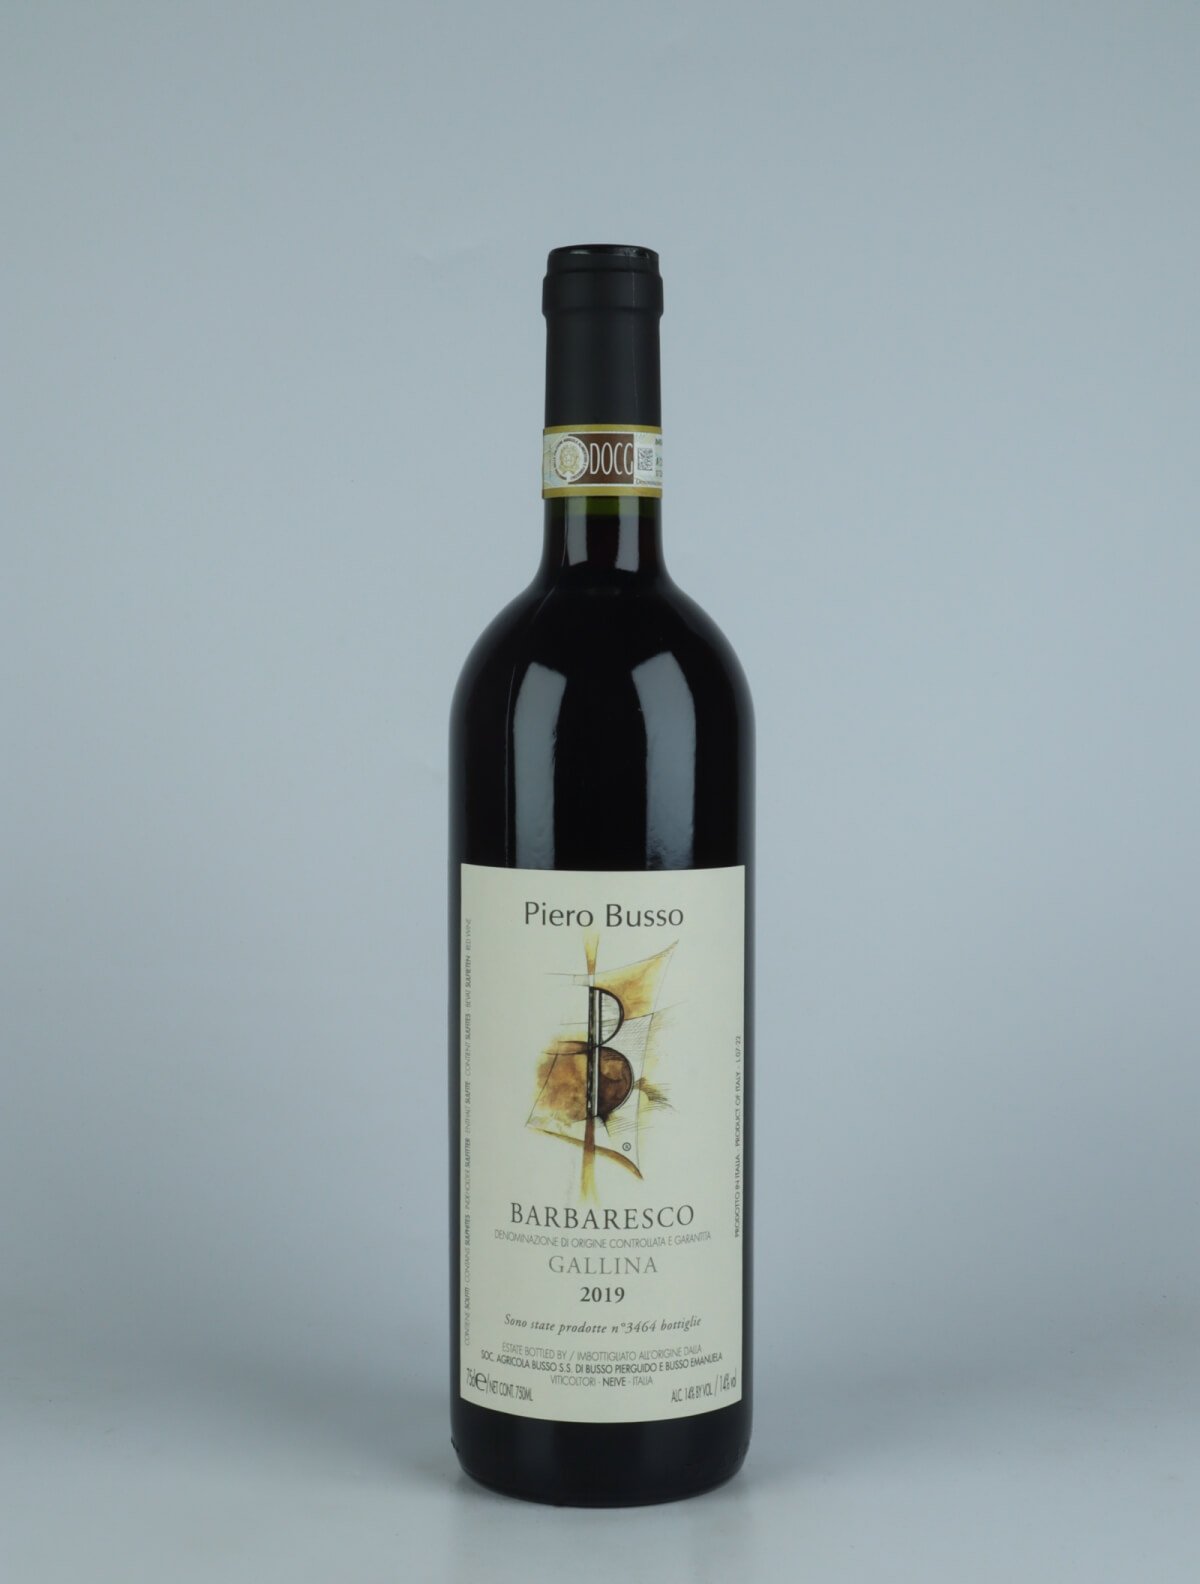 A bottle 2019 Barbaresco Gallina Red wine from Piero Busso, Piedmont in Italy